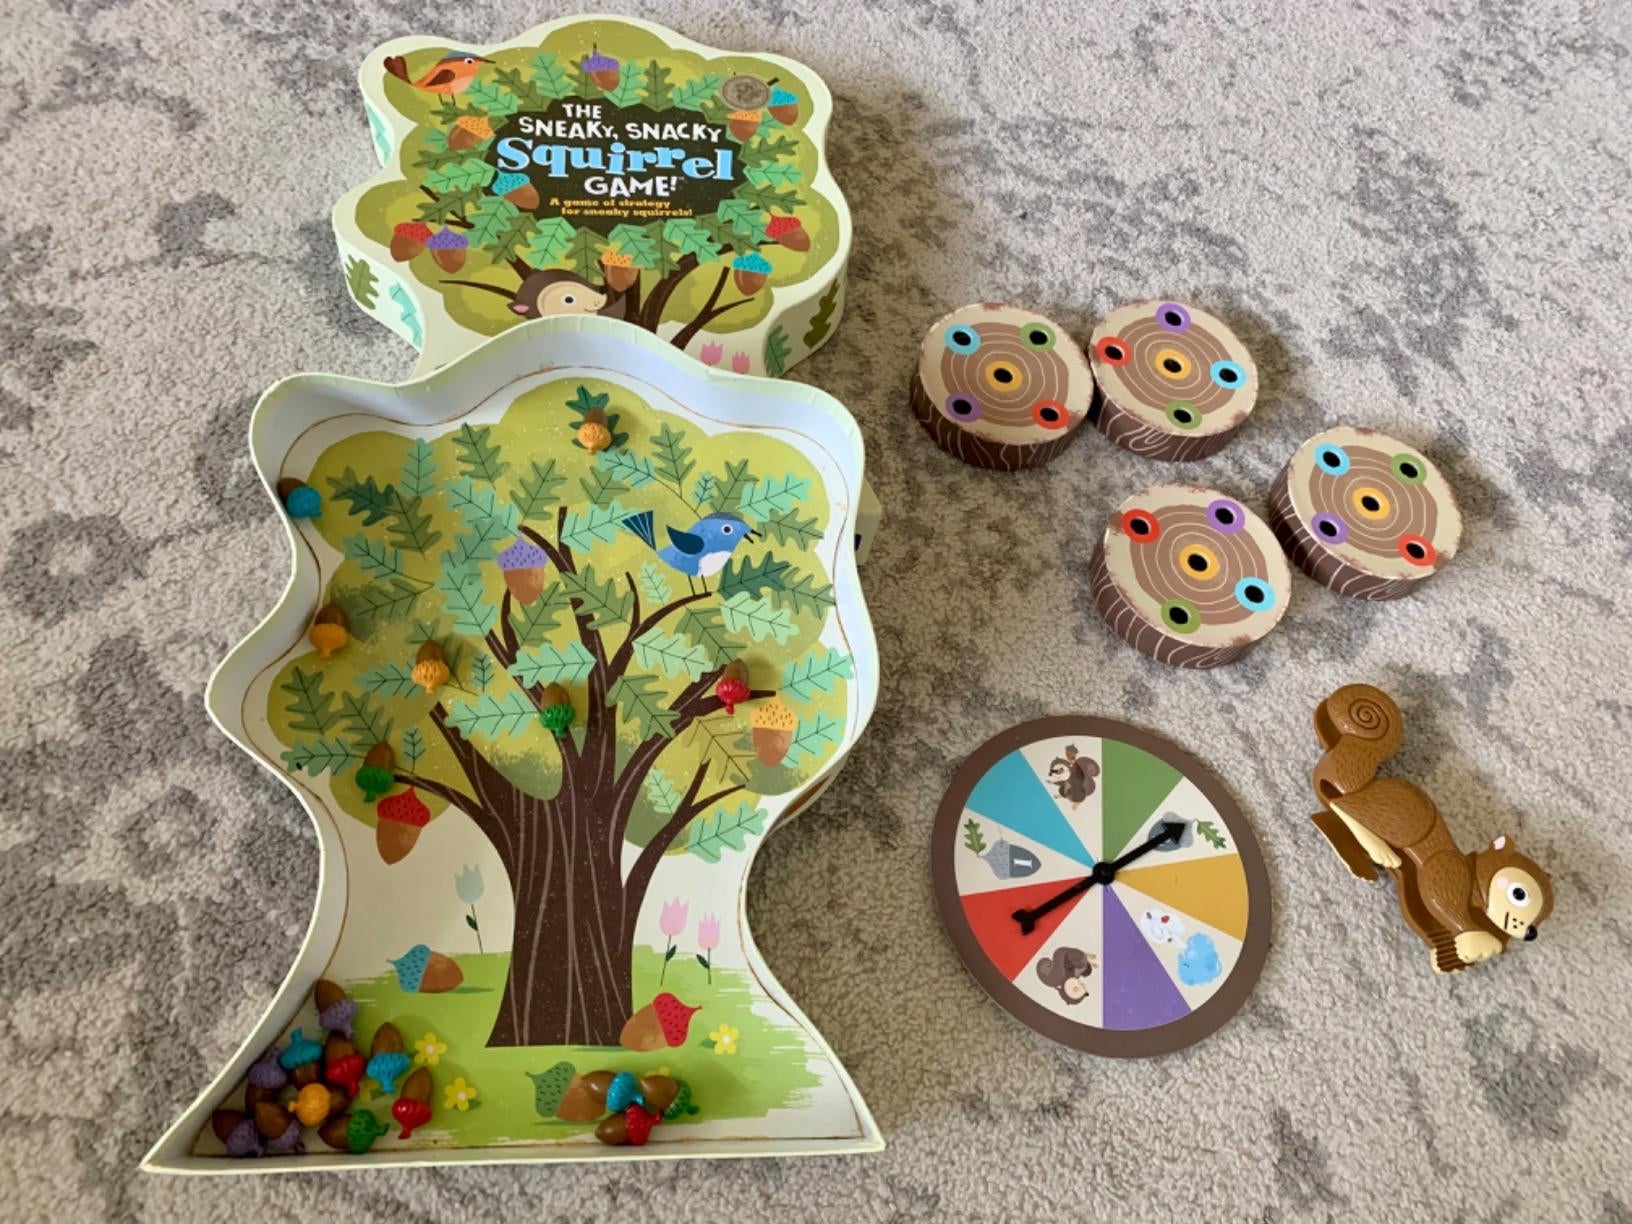 Reviewer image of tree-shaped game board with squirrel, spinner, and tree log pieces